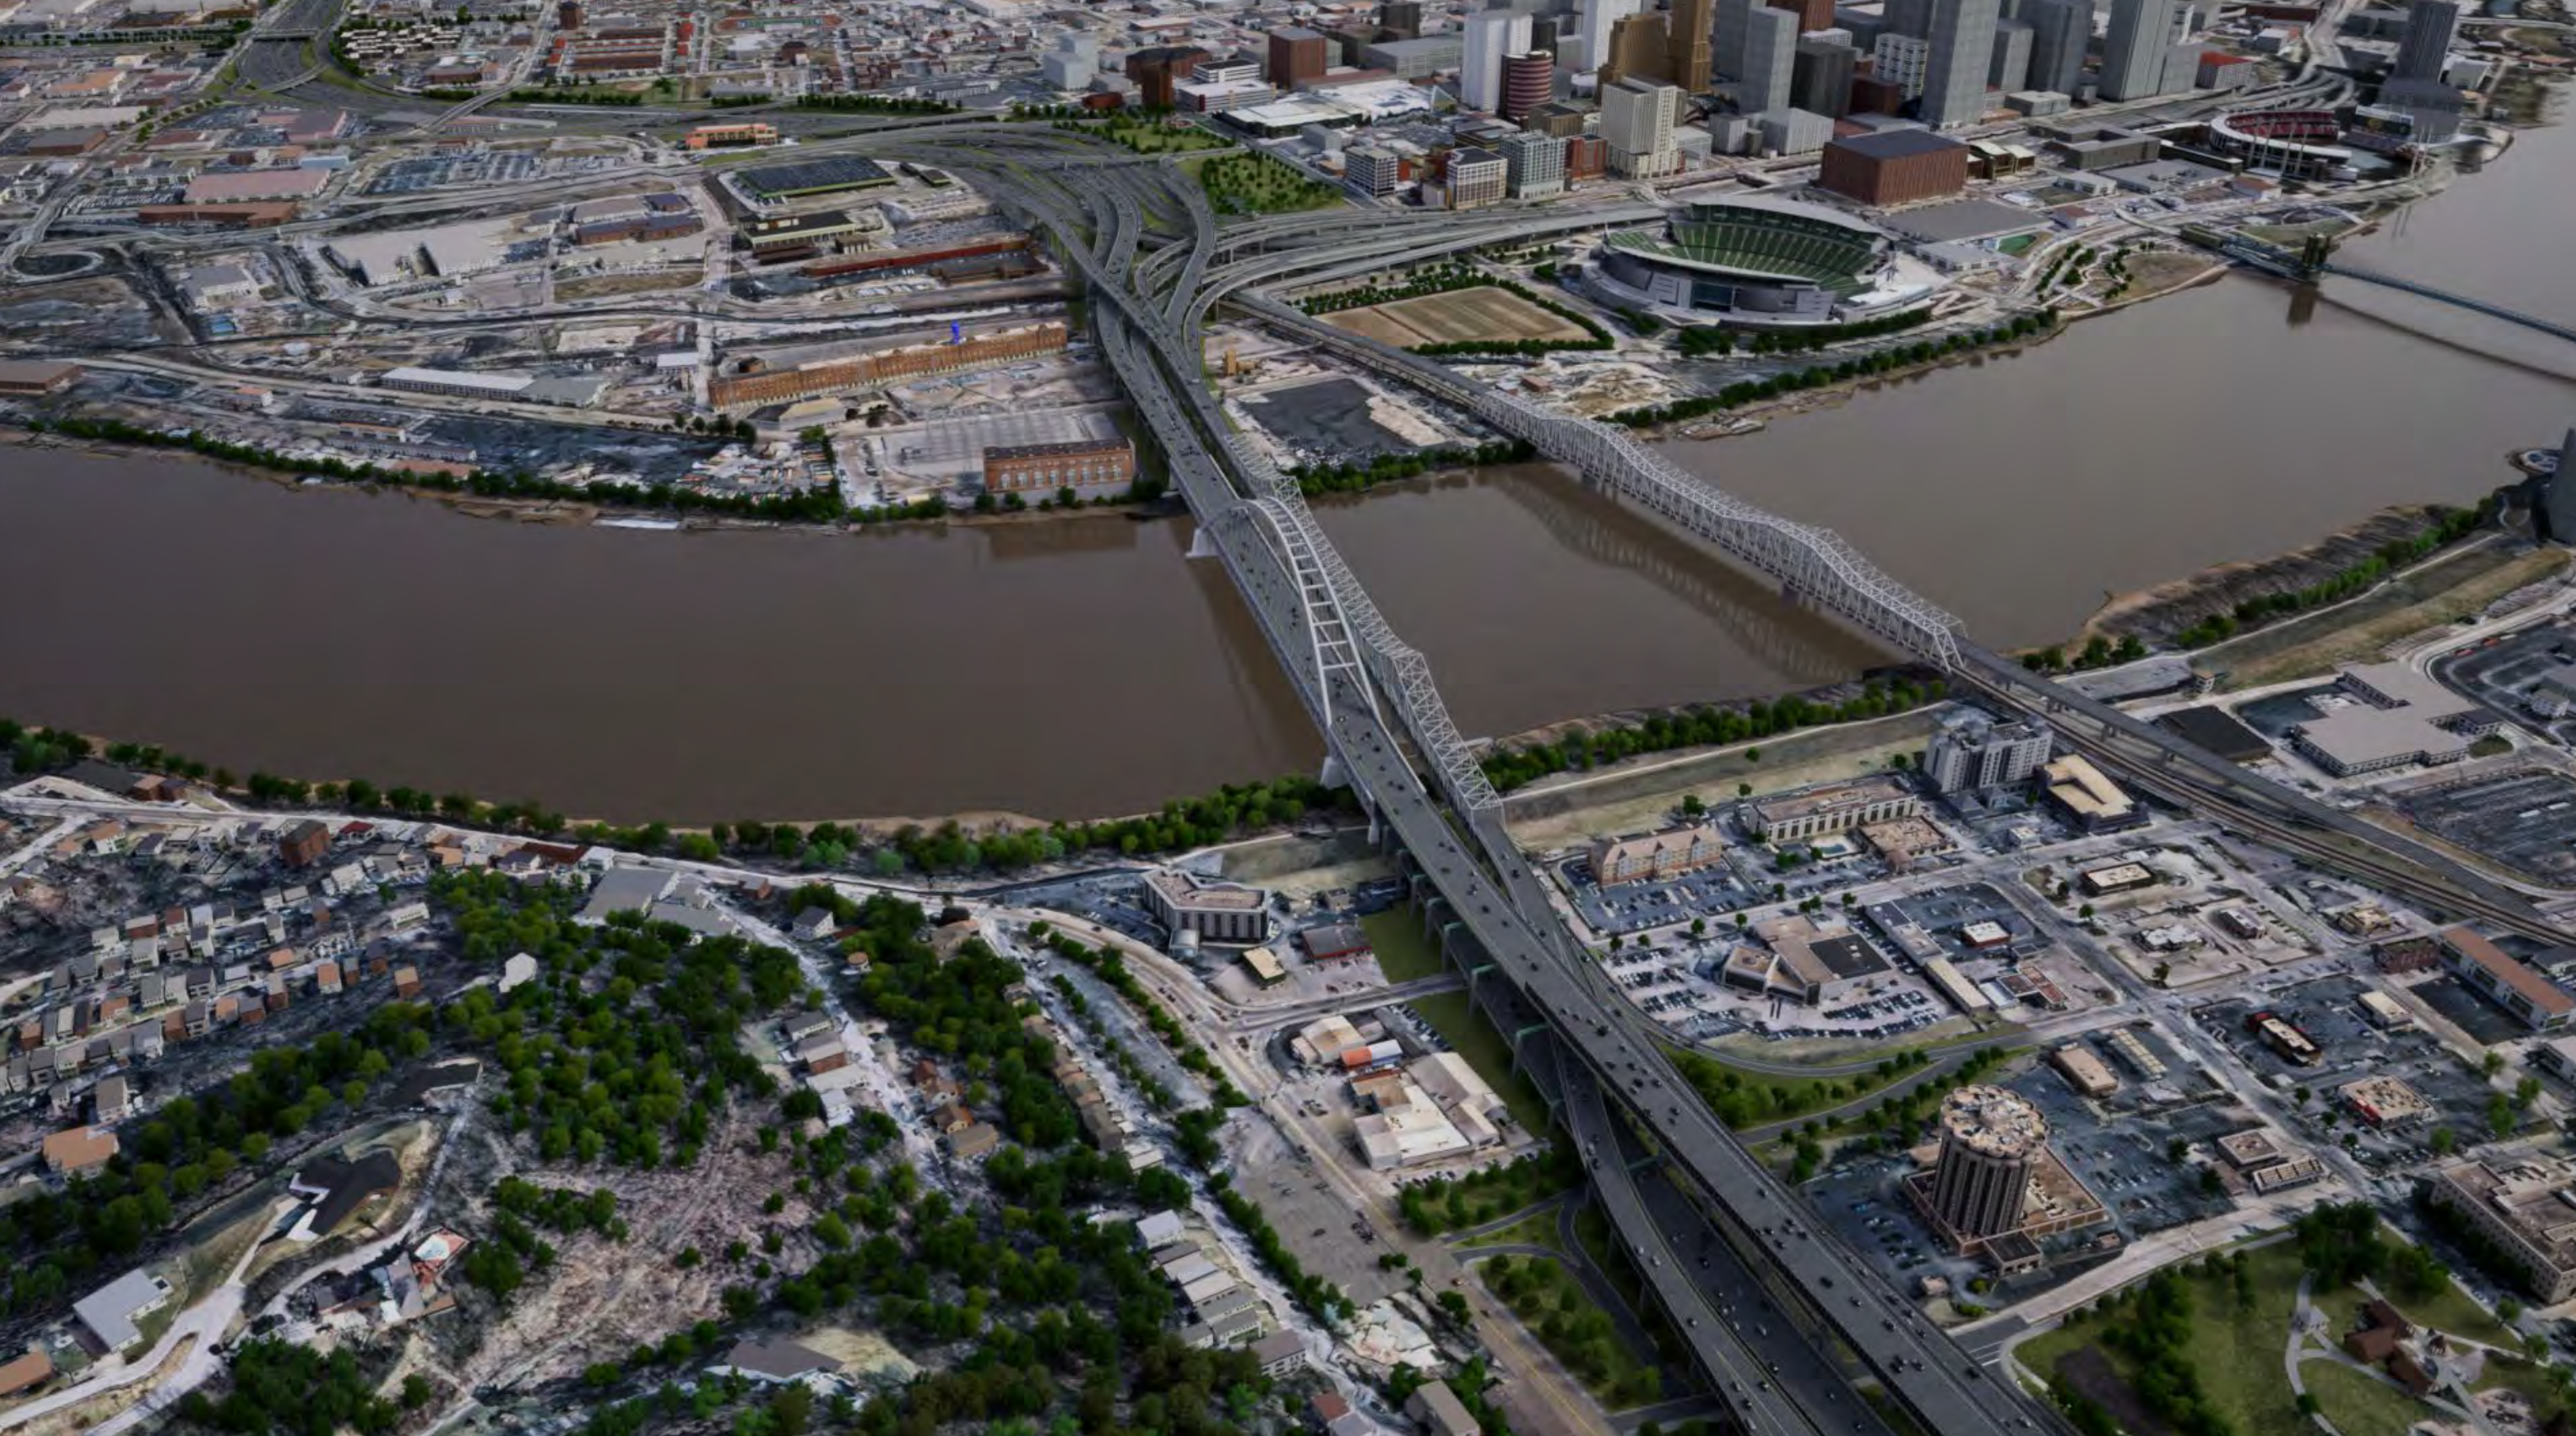 Design changes made to Brent Spence Bridge project in OH and KY to align with public's requests